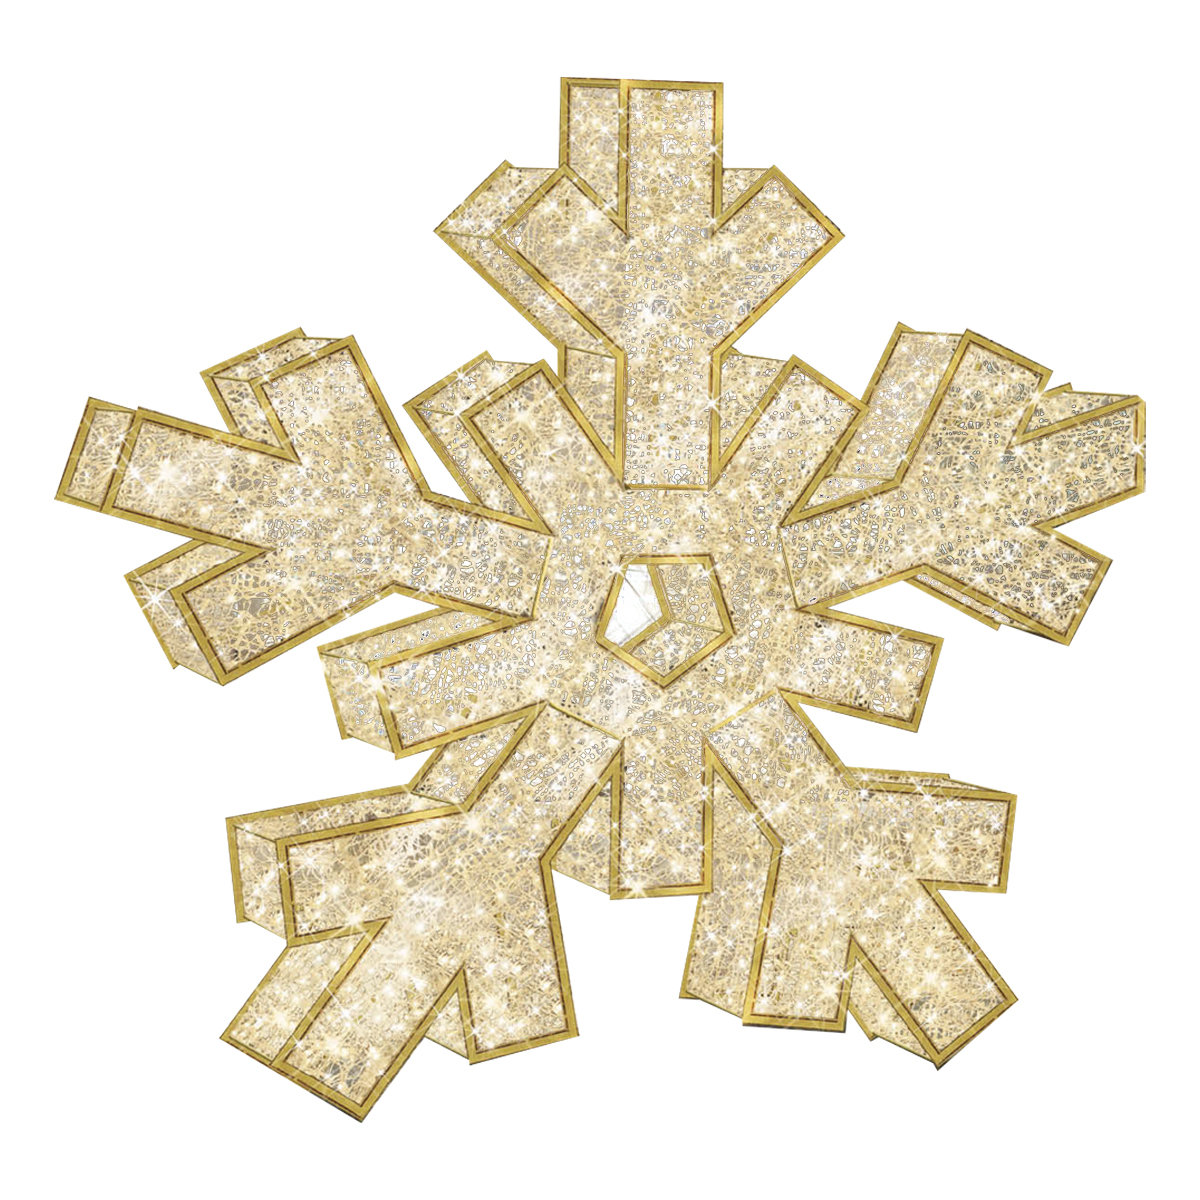 3D Snowflake - Gold Christmas Display - Cool White LEDs - Large - 9.8ft tall